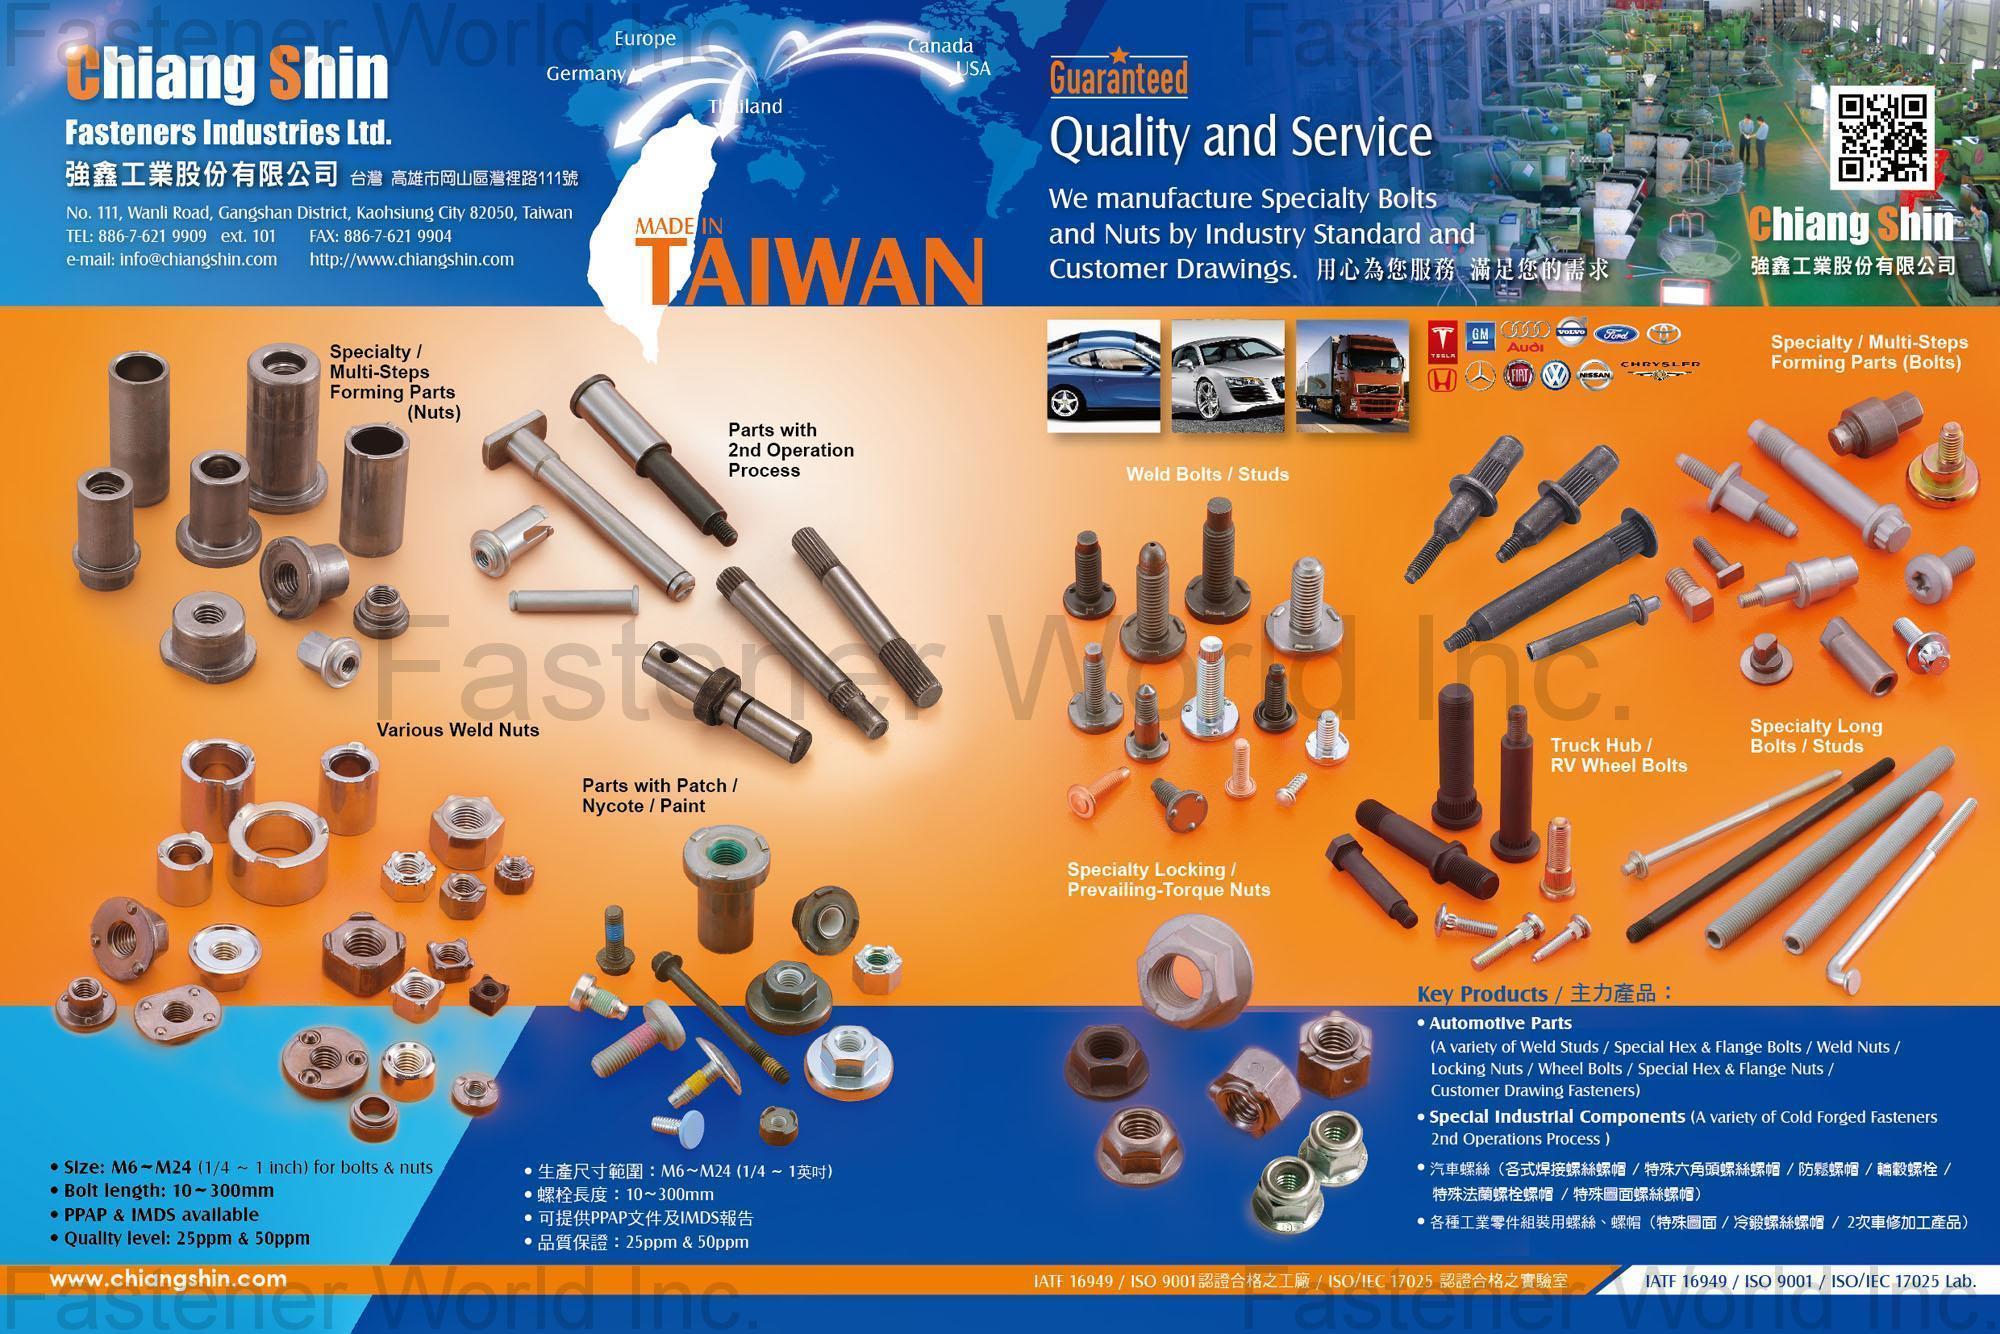 CHIANG SHIN FASTENERS INDUSTRIES LTD.  , Automotive Parts (Weld Studs, Special Hex & Flange Bolts, Weld Nuts, Locking Nuts, Wheel Bolts, Special Hex & Flange Nuts, Customer Drawing Fasteners), Special Industrial Components , Automotive Parts